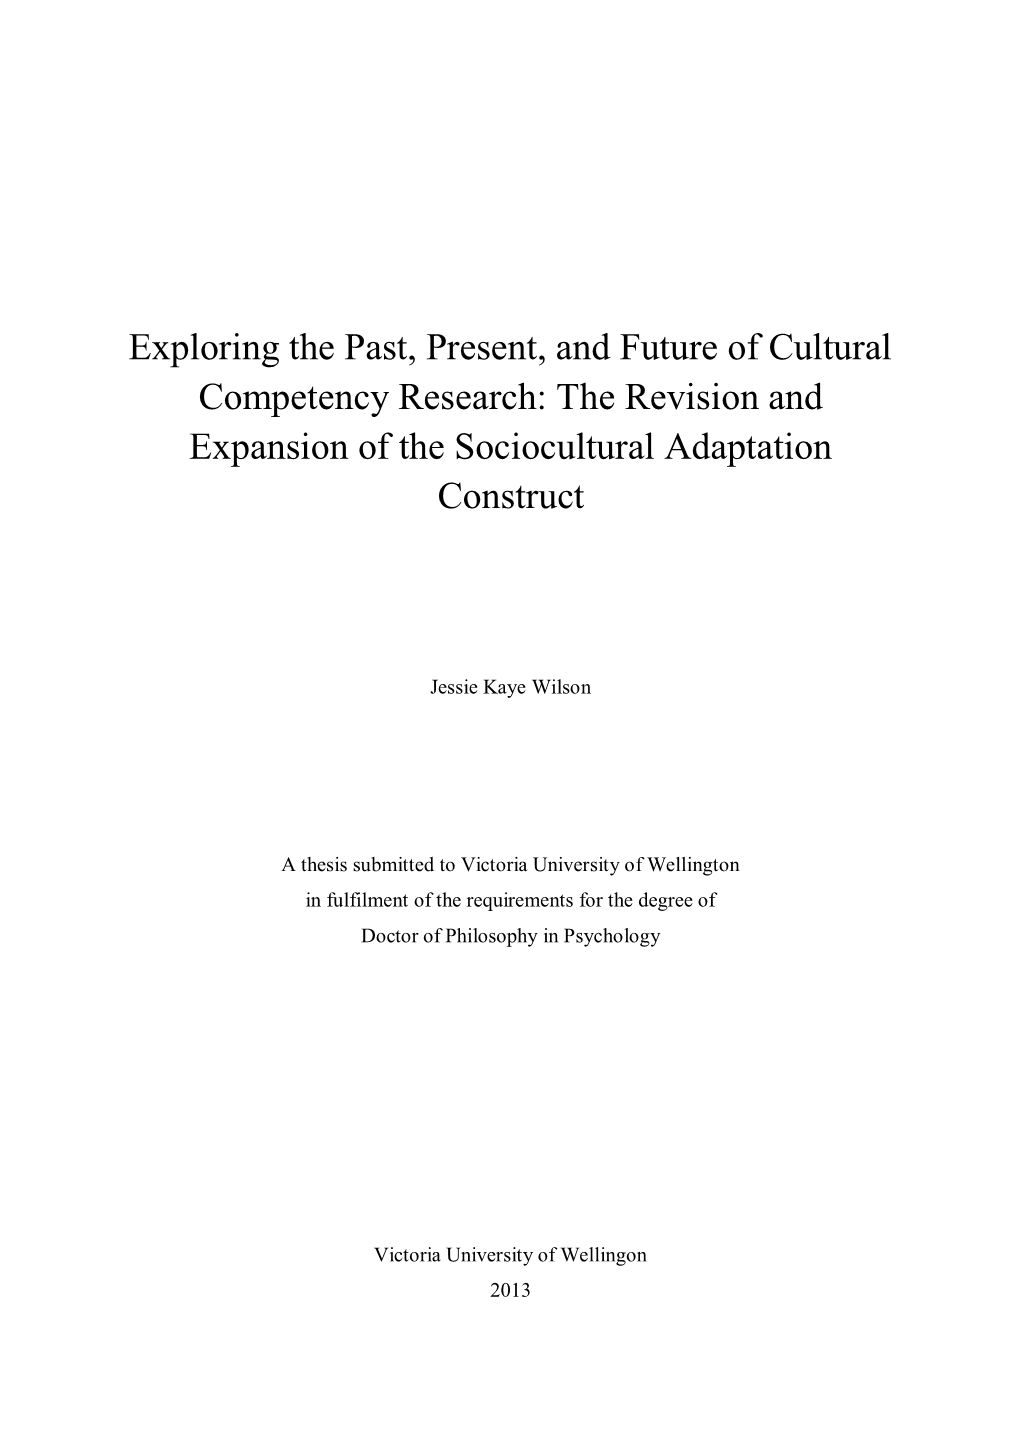 Exploring the Past, Present, and Future of Cultural Competency Research: the Revision and Expansion of the Sociocultural Adaptation Construct